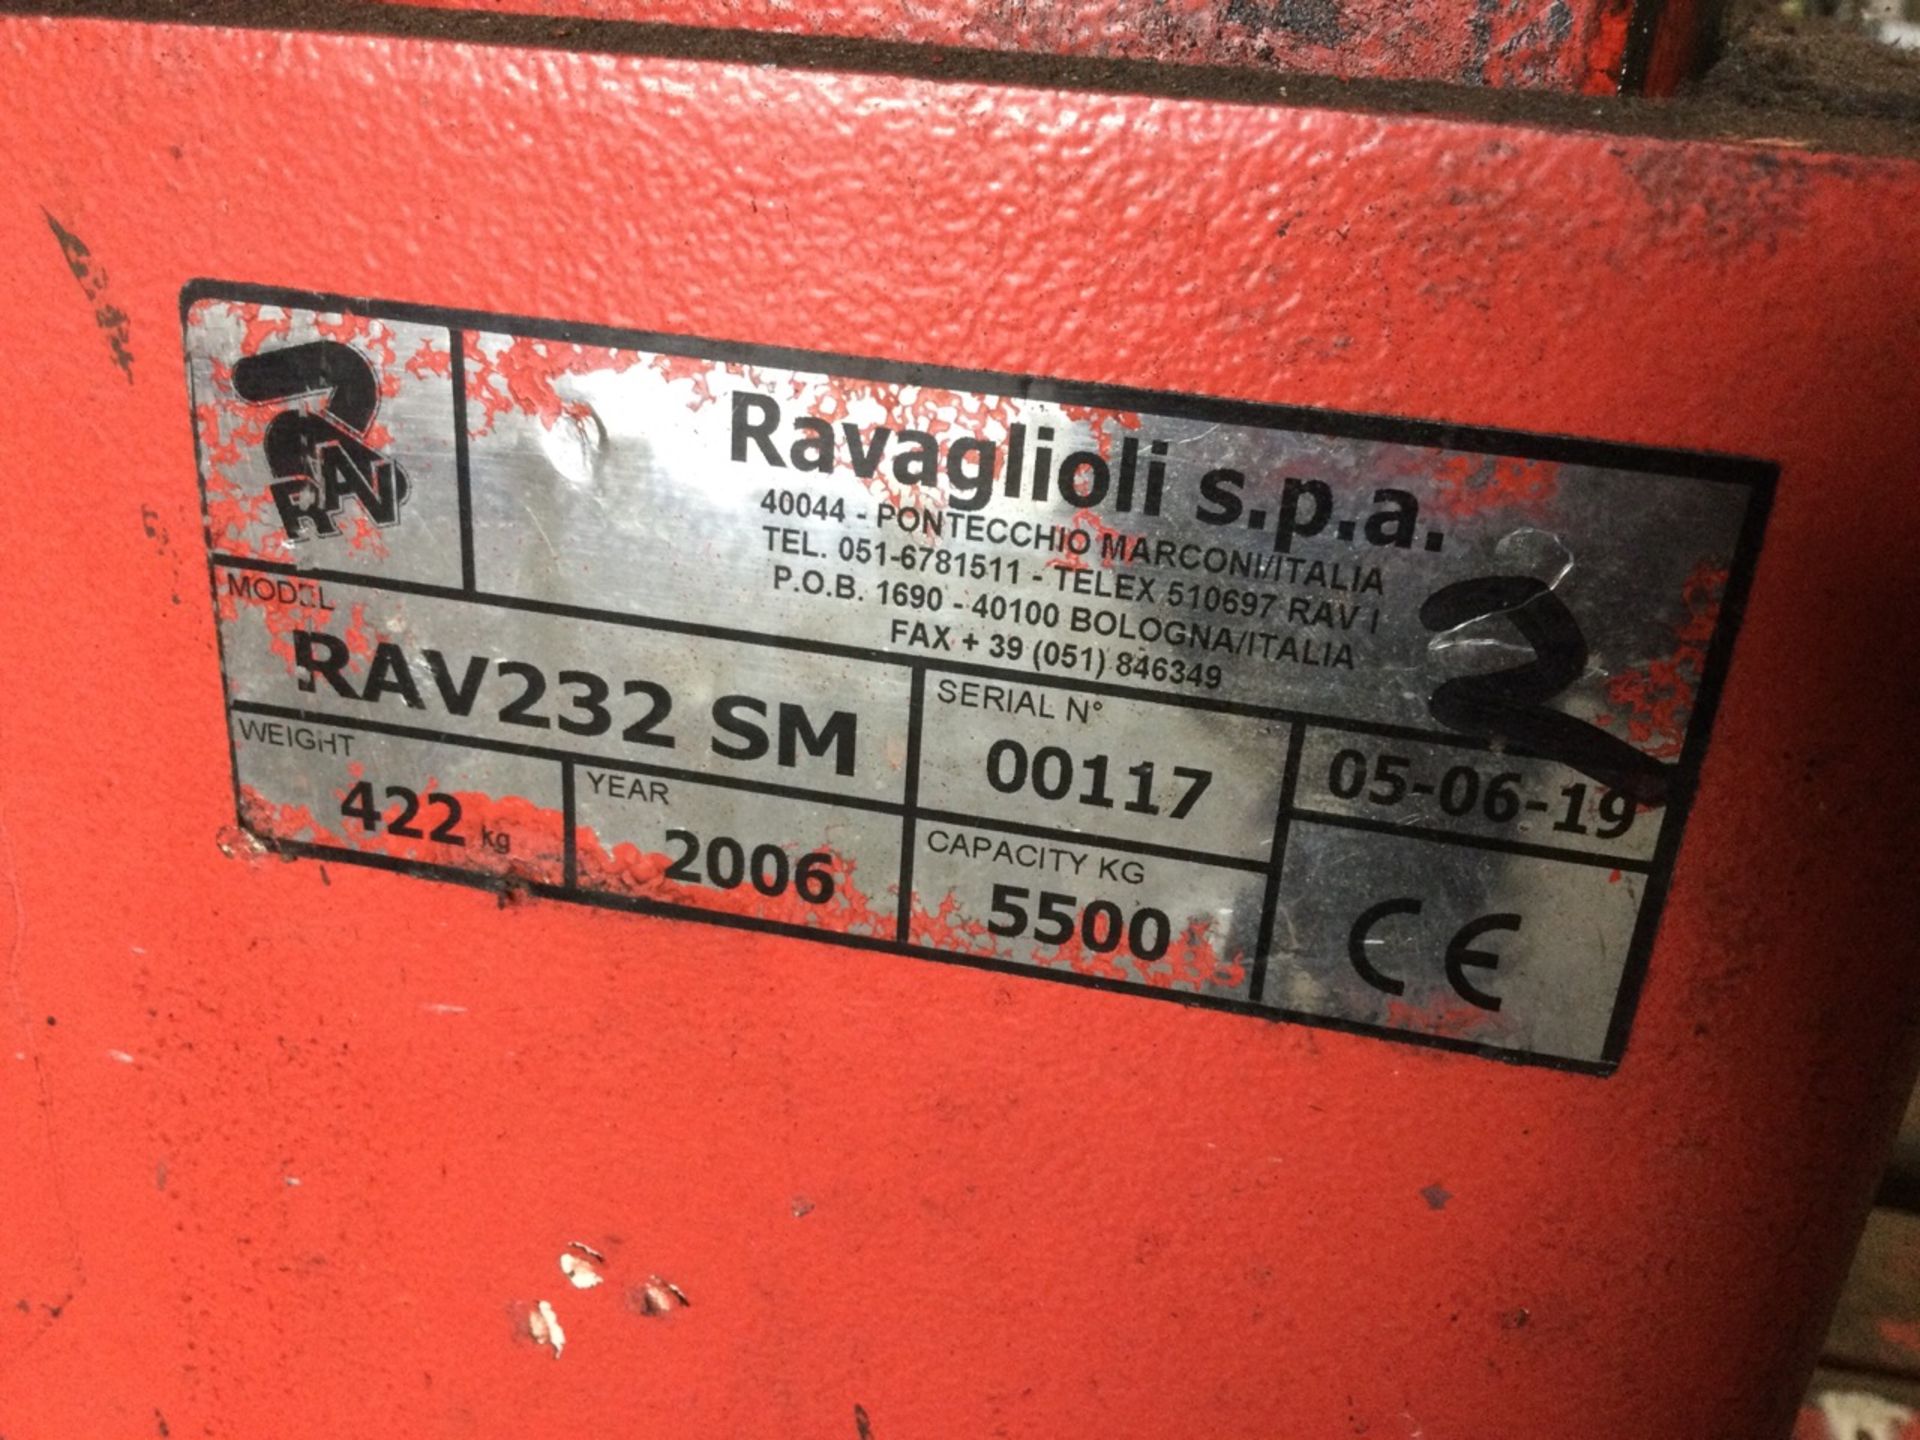 Somers/Ravaglioli RAV232 SM Mobile Cable Connected Vehicle Stands, Each 5500kg Capacity, serial numb - Image 3 of 6